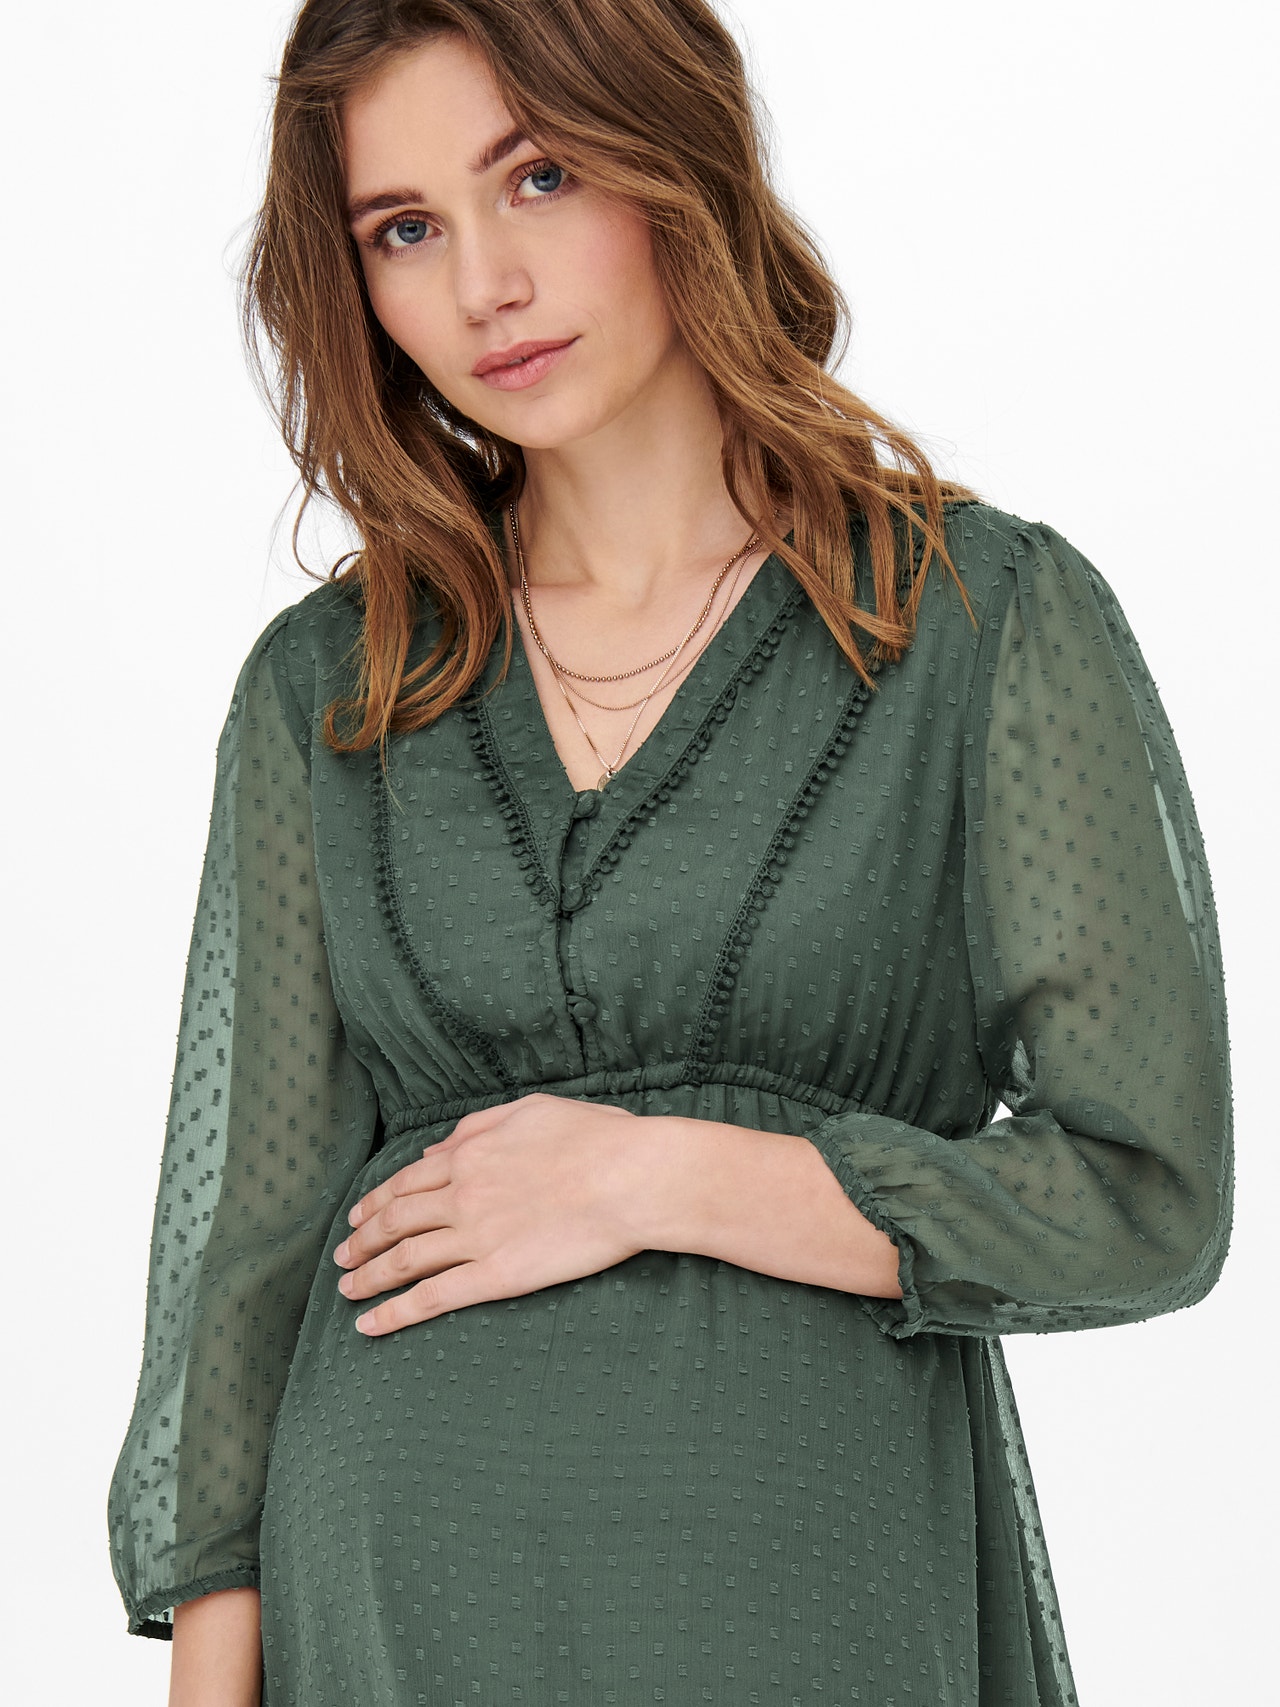 ONLY Mama 3/4 sleeved Dress -Balsam Green - 15269638